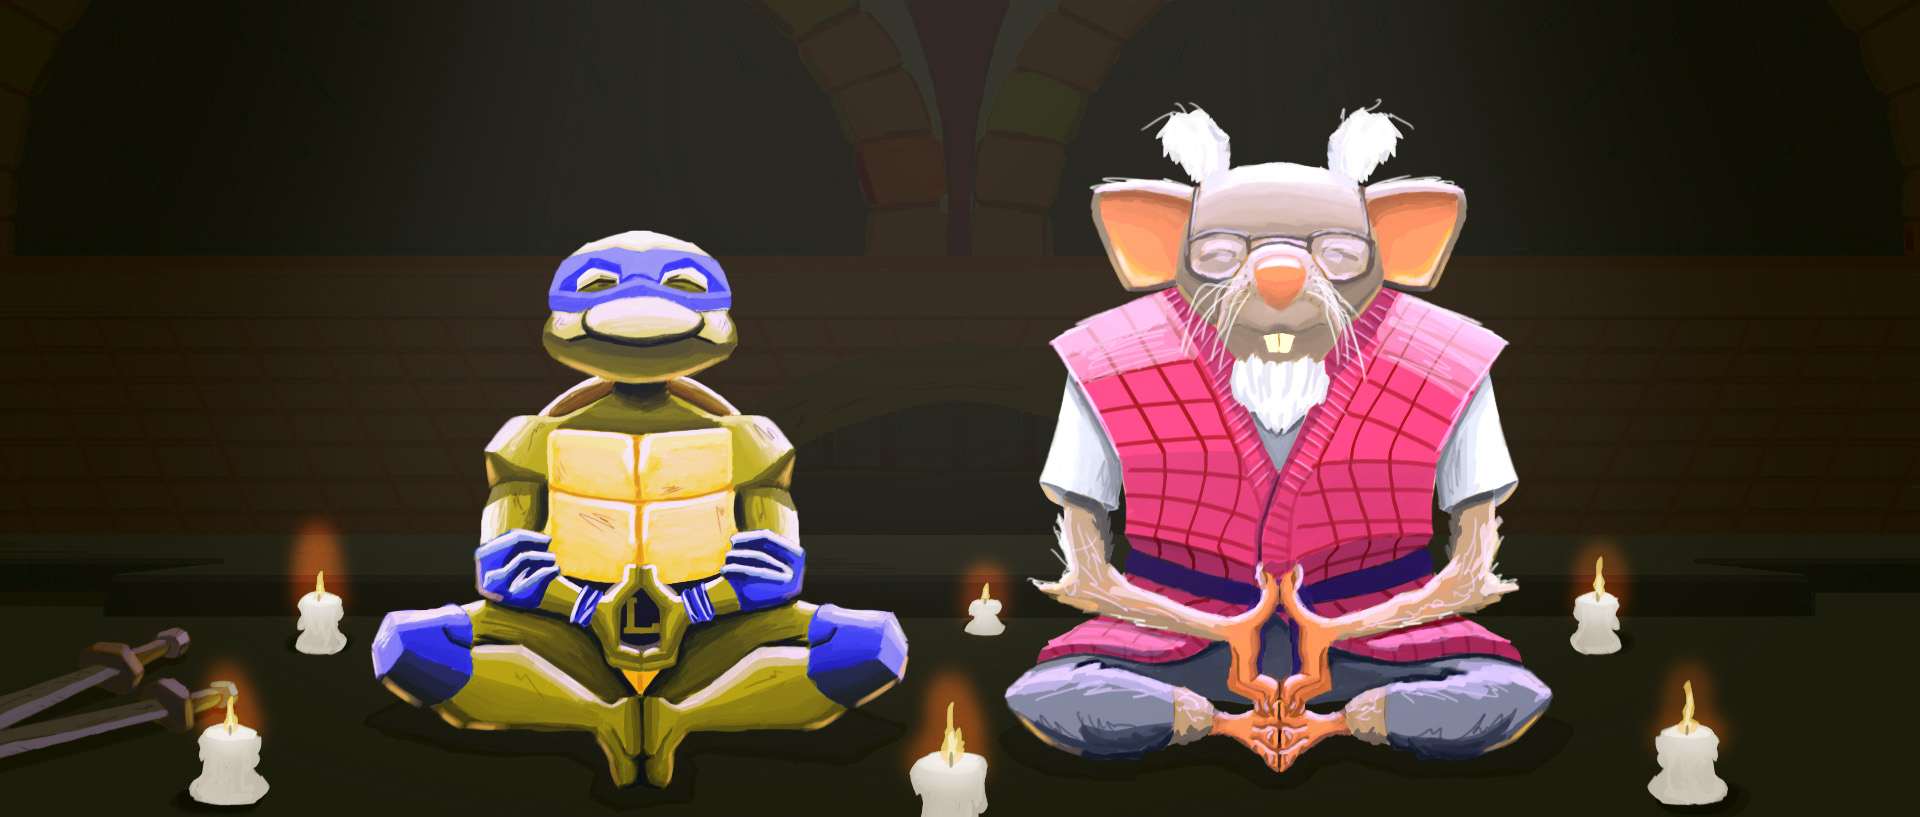  / An illustration of Leonardo and Splinter meditating in their hideout in the sewers in the style of Teenage Mutant Ninja Turtles Mutant Mayhem. It was made in photoshop.